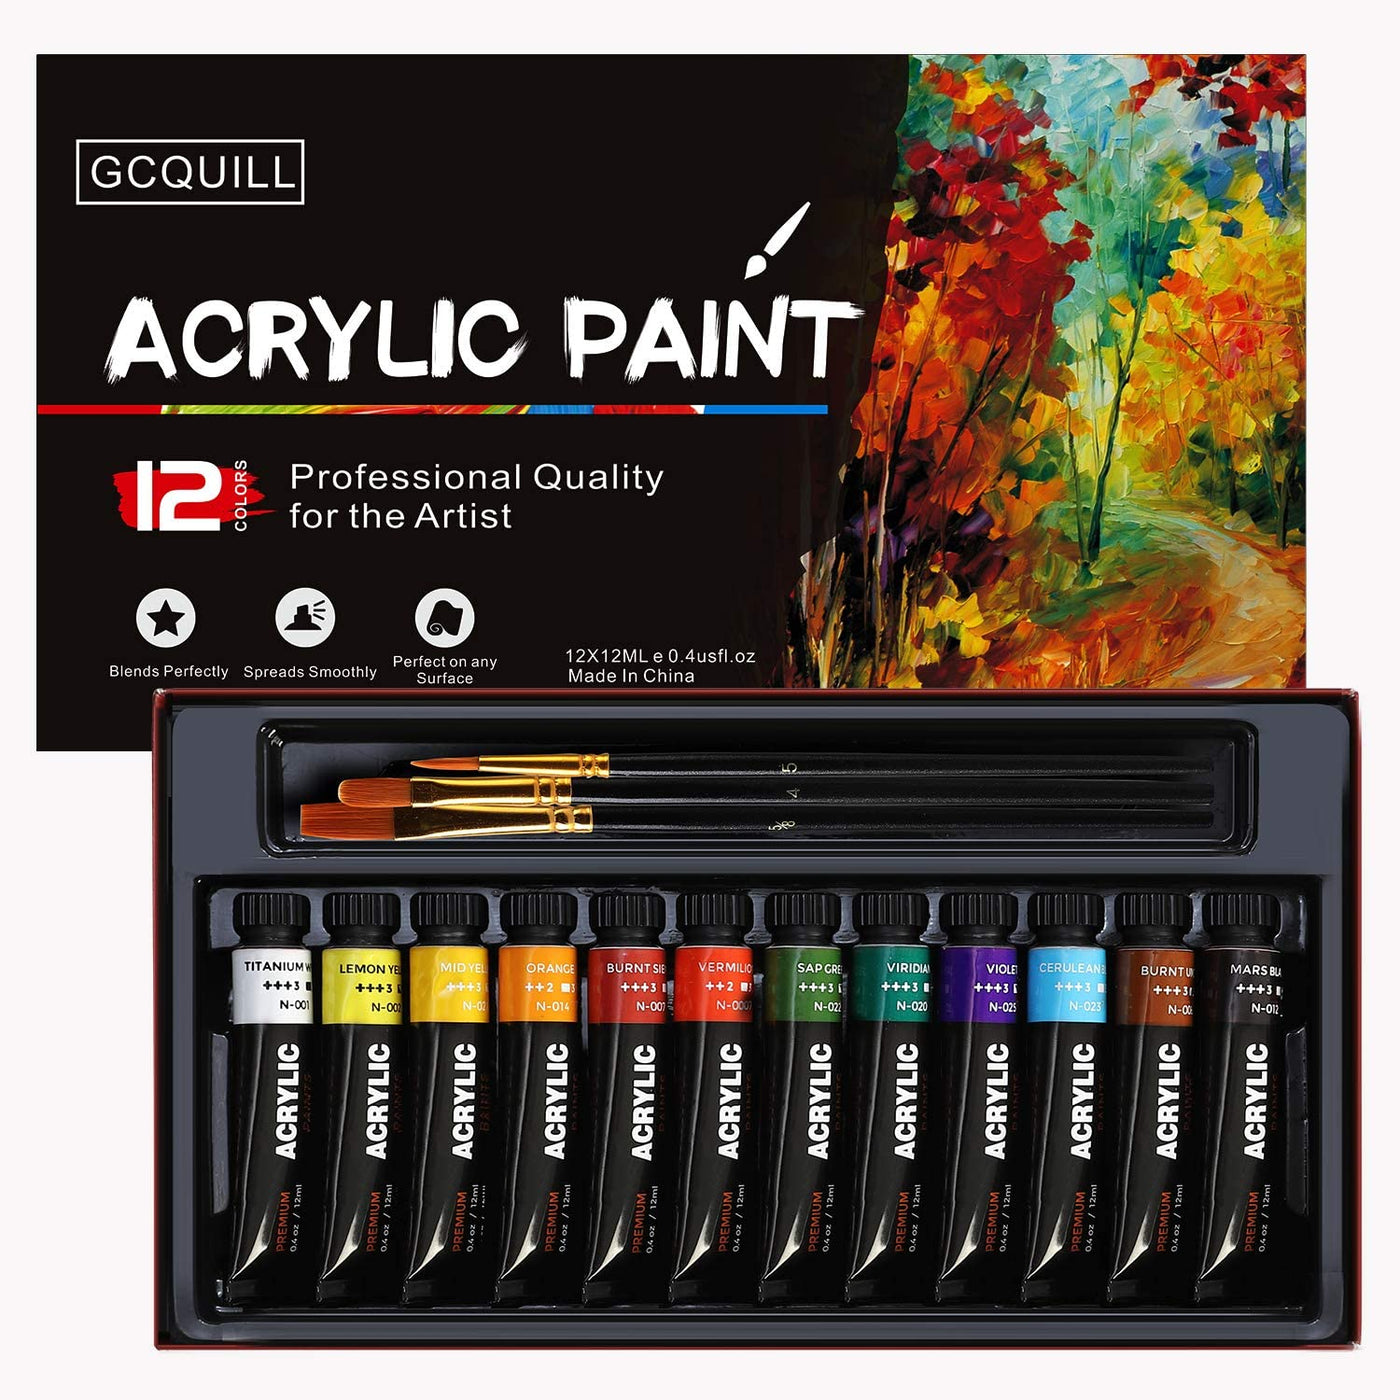 Acrylic Paint, Set of 12 Paints - for Canvas, Fabric, Glass